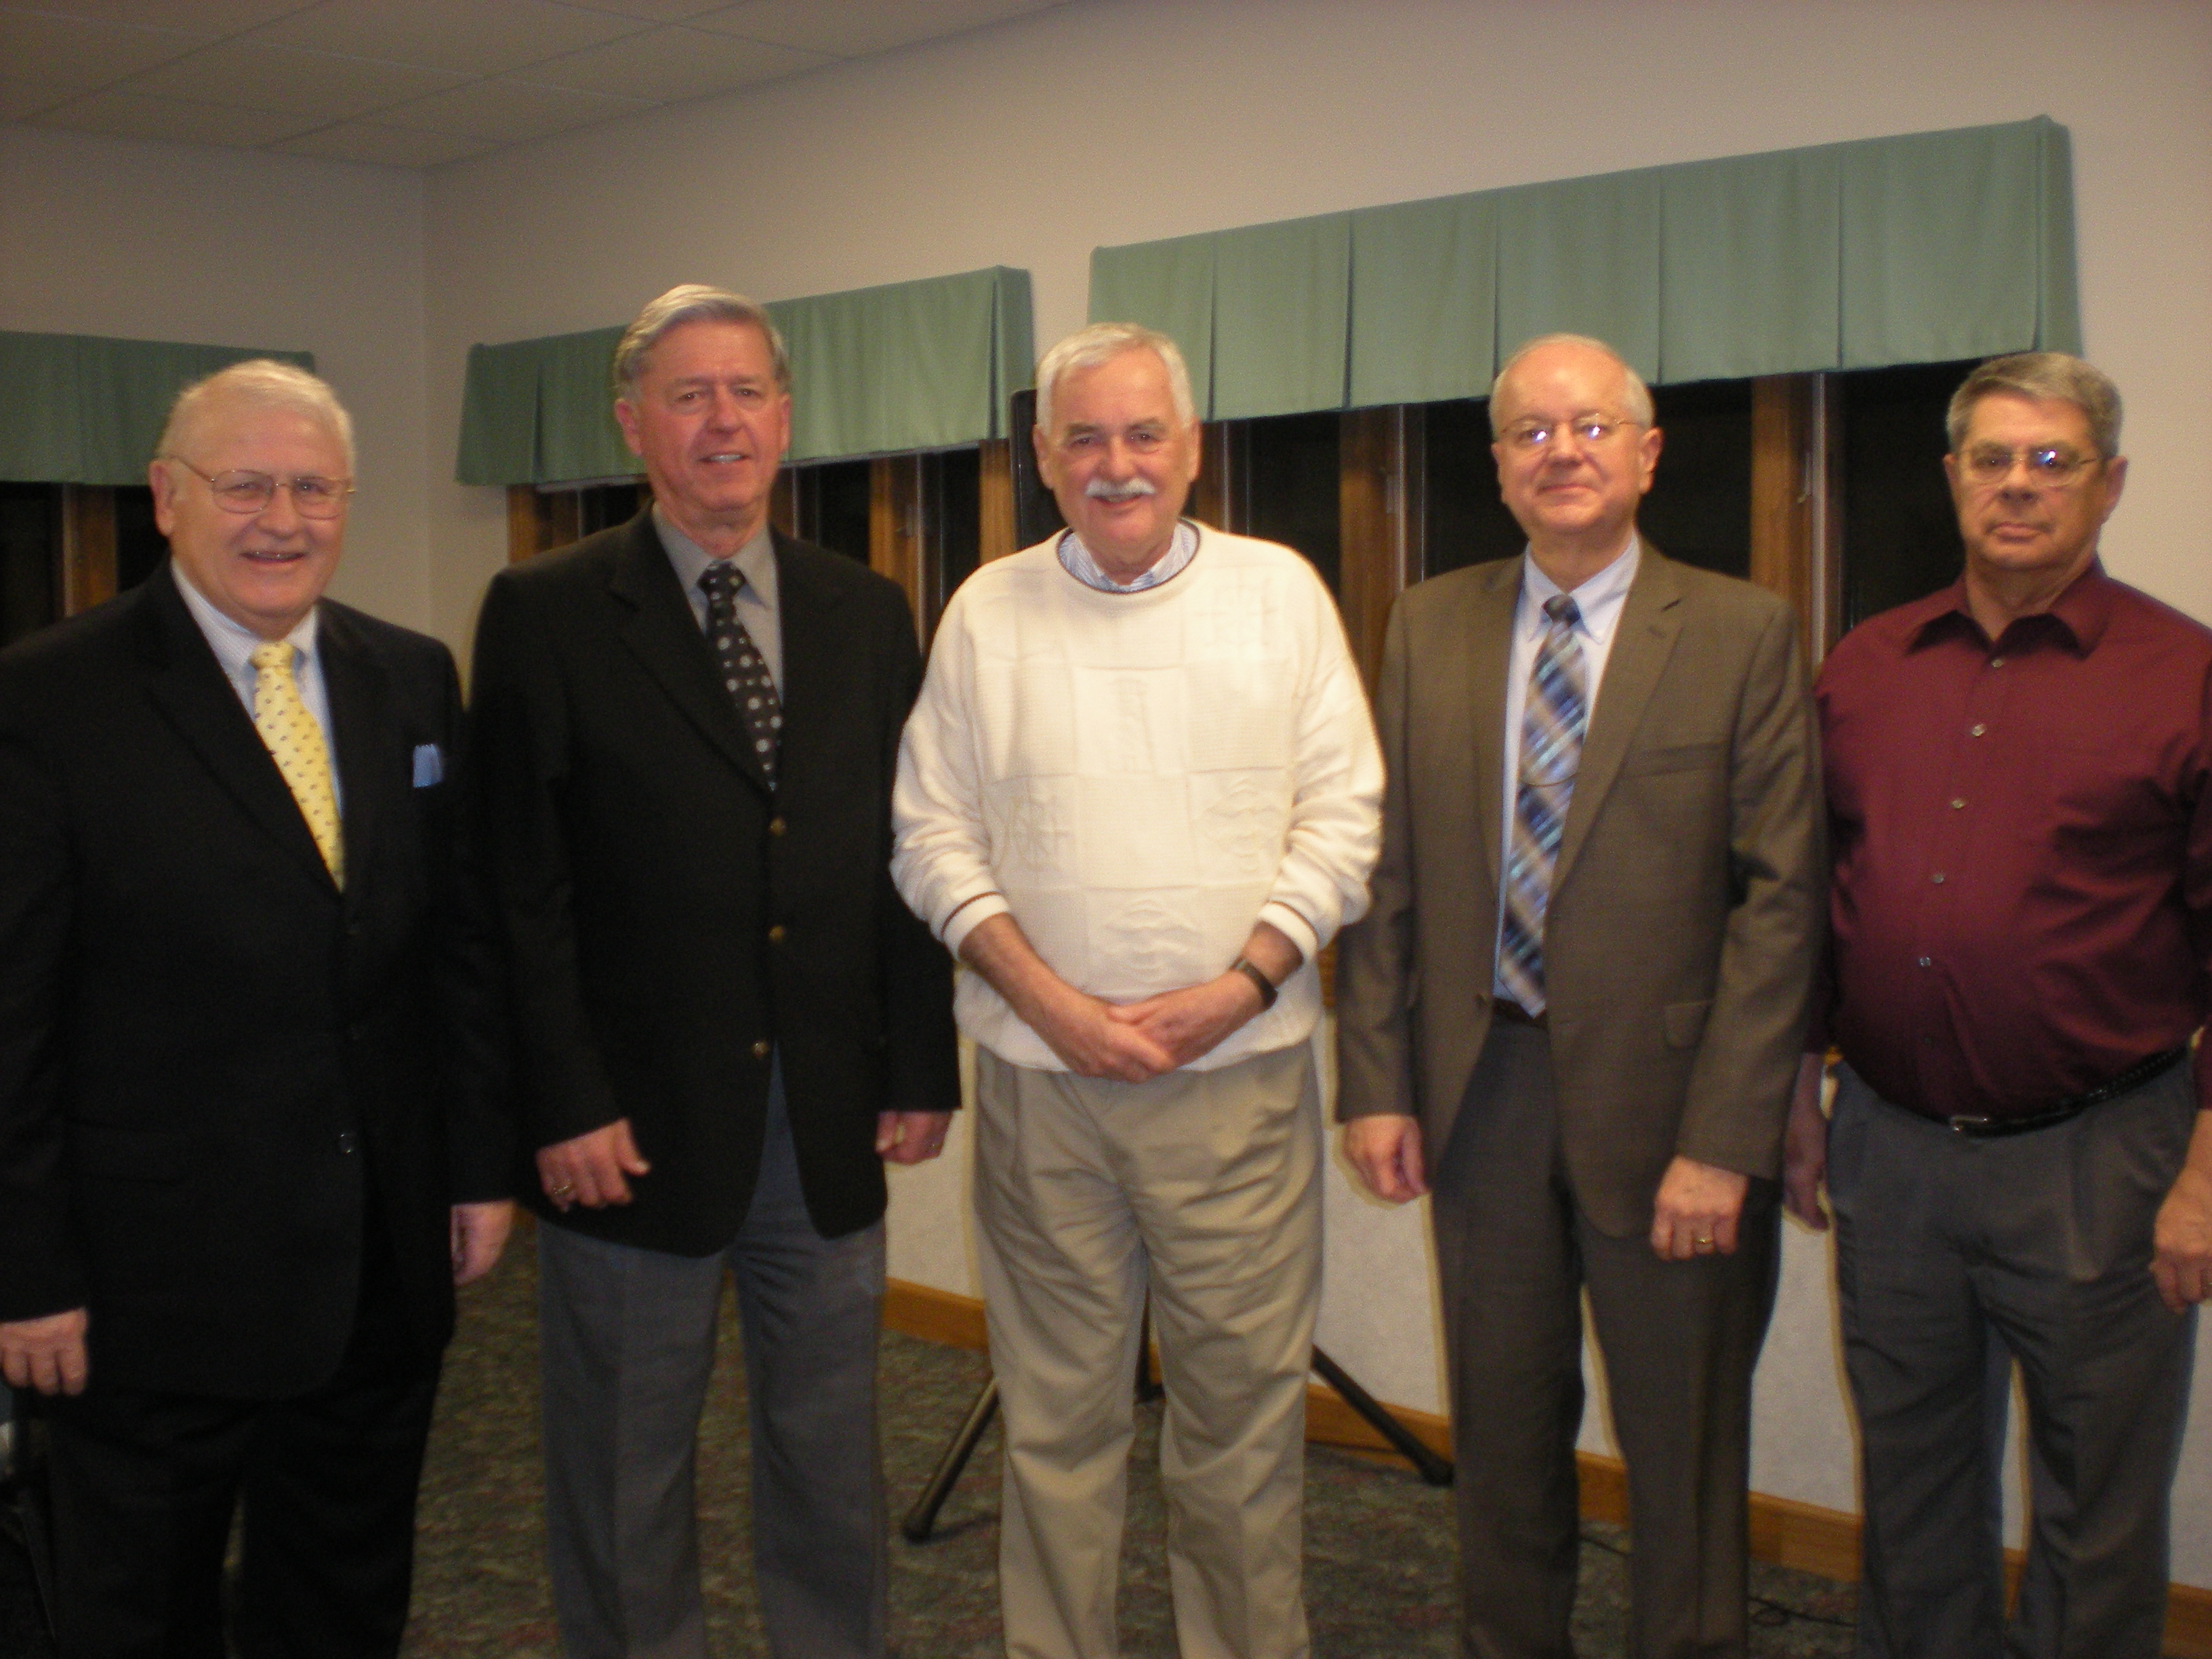 Founding board members Robert Wyne, Fred Walker, Robert Barry, Ted Leas, and Rod Black attended a 2012 Foundation celebration.